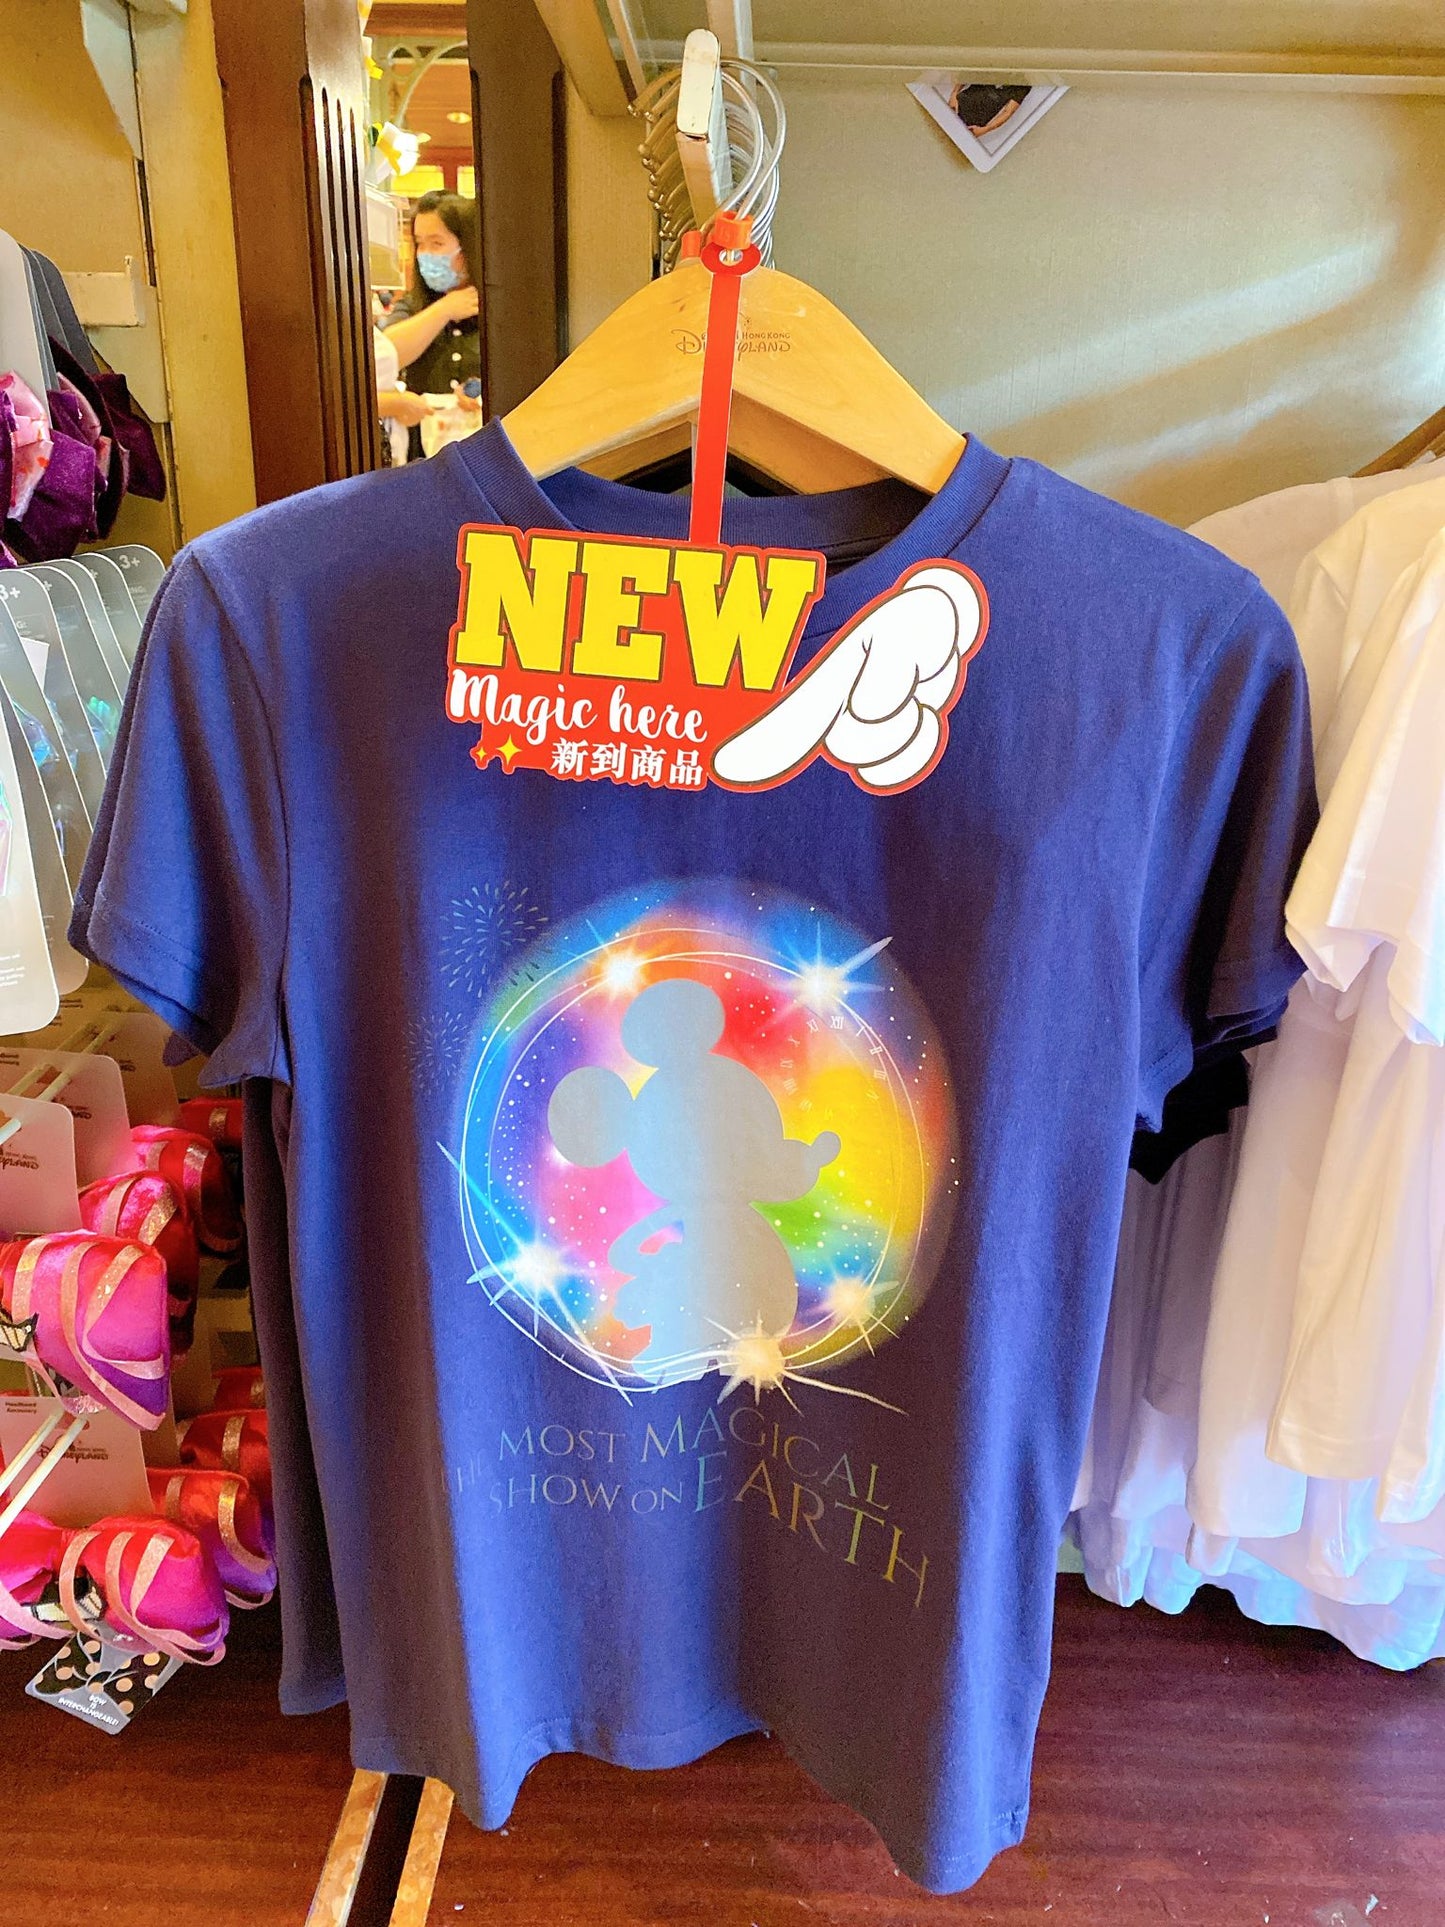 HKDL - Momentous Collection - Tshirt (with Rainbow reflective effect!)